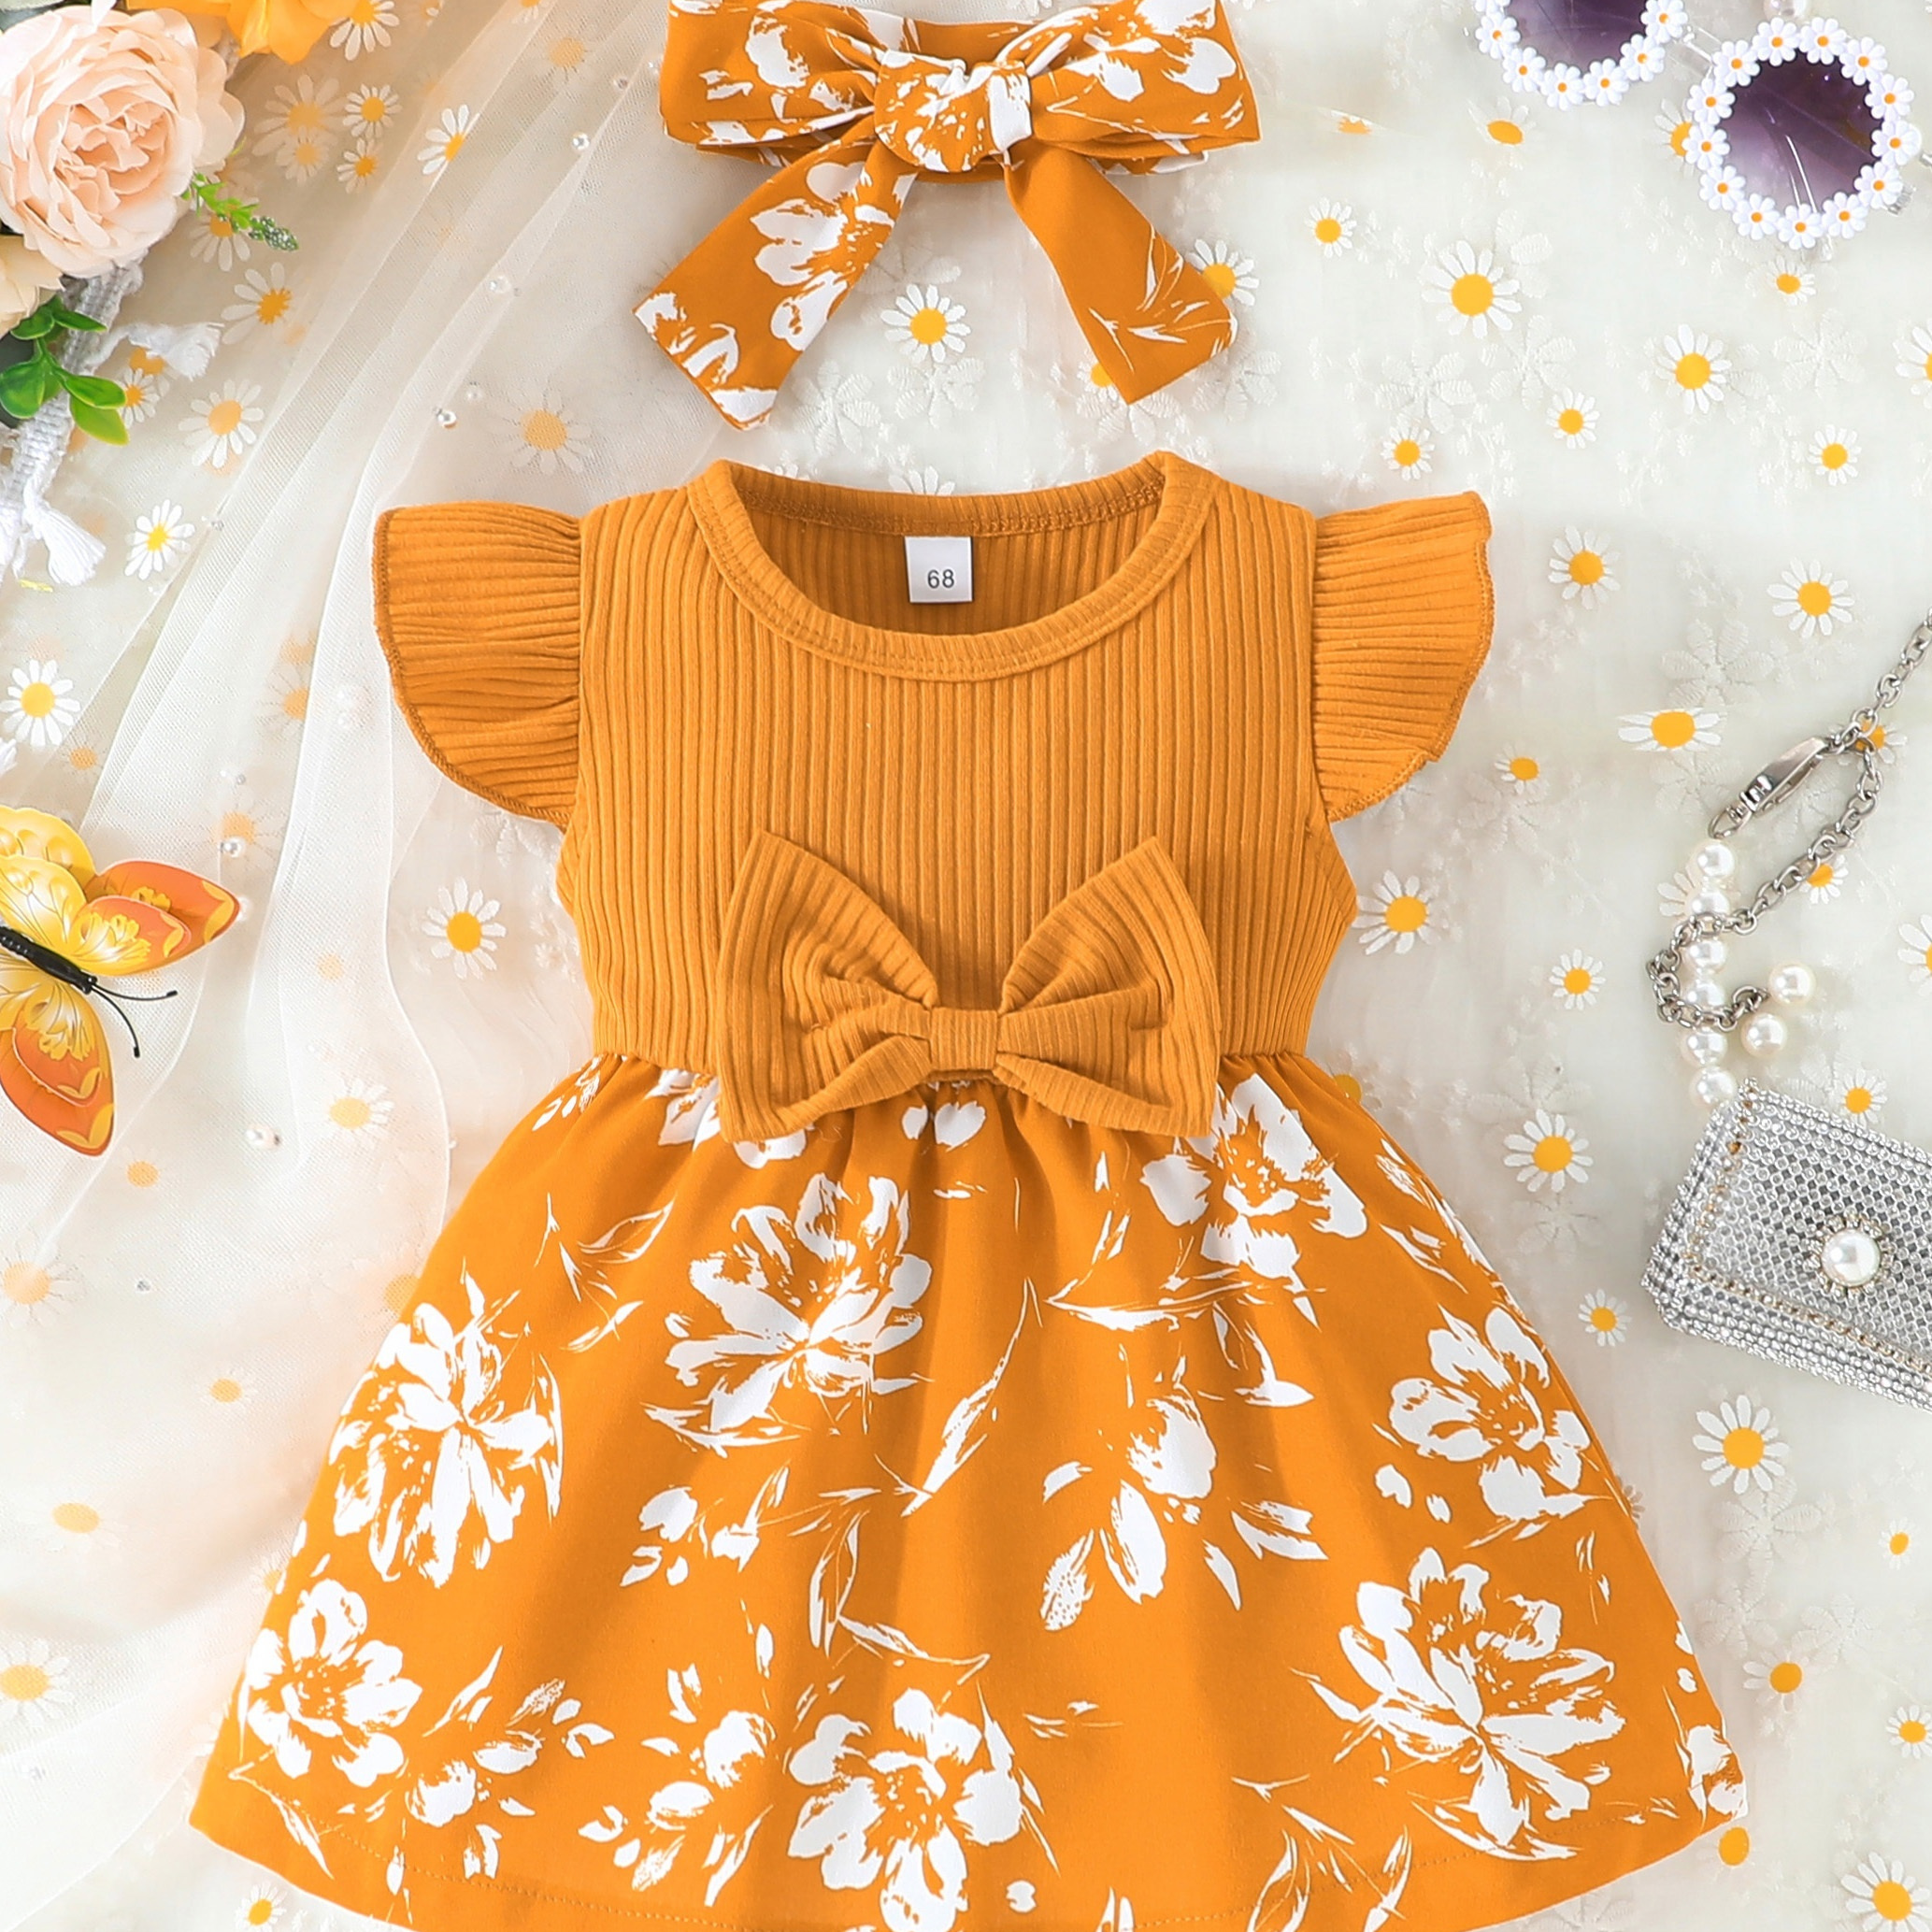 

Baby's Flower Pattern Splicing Casual Cotton Dress & Headband, Bowknot Decor Cap Sleeve Dress, Infant & Toddler Girl's Clothing For Summer/spring, As Gift